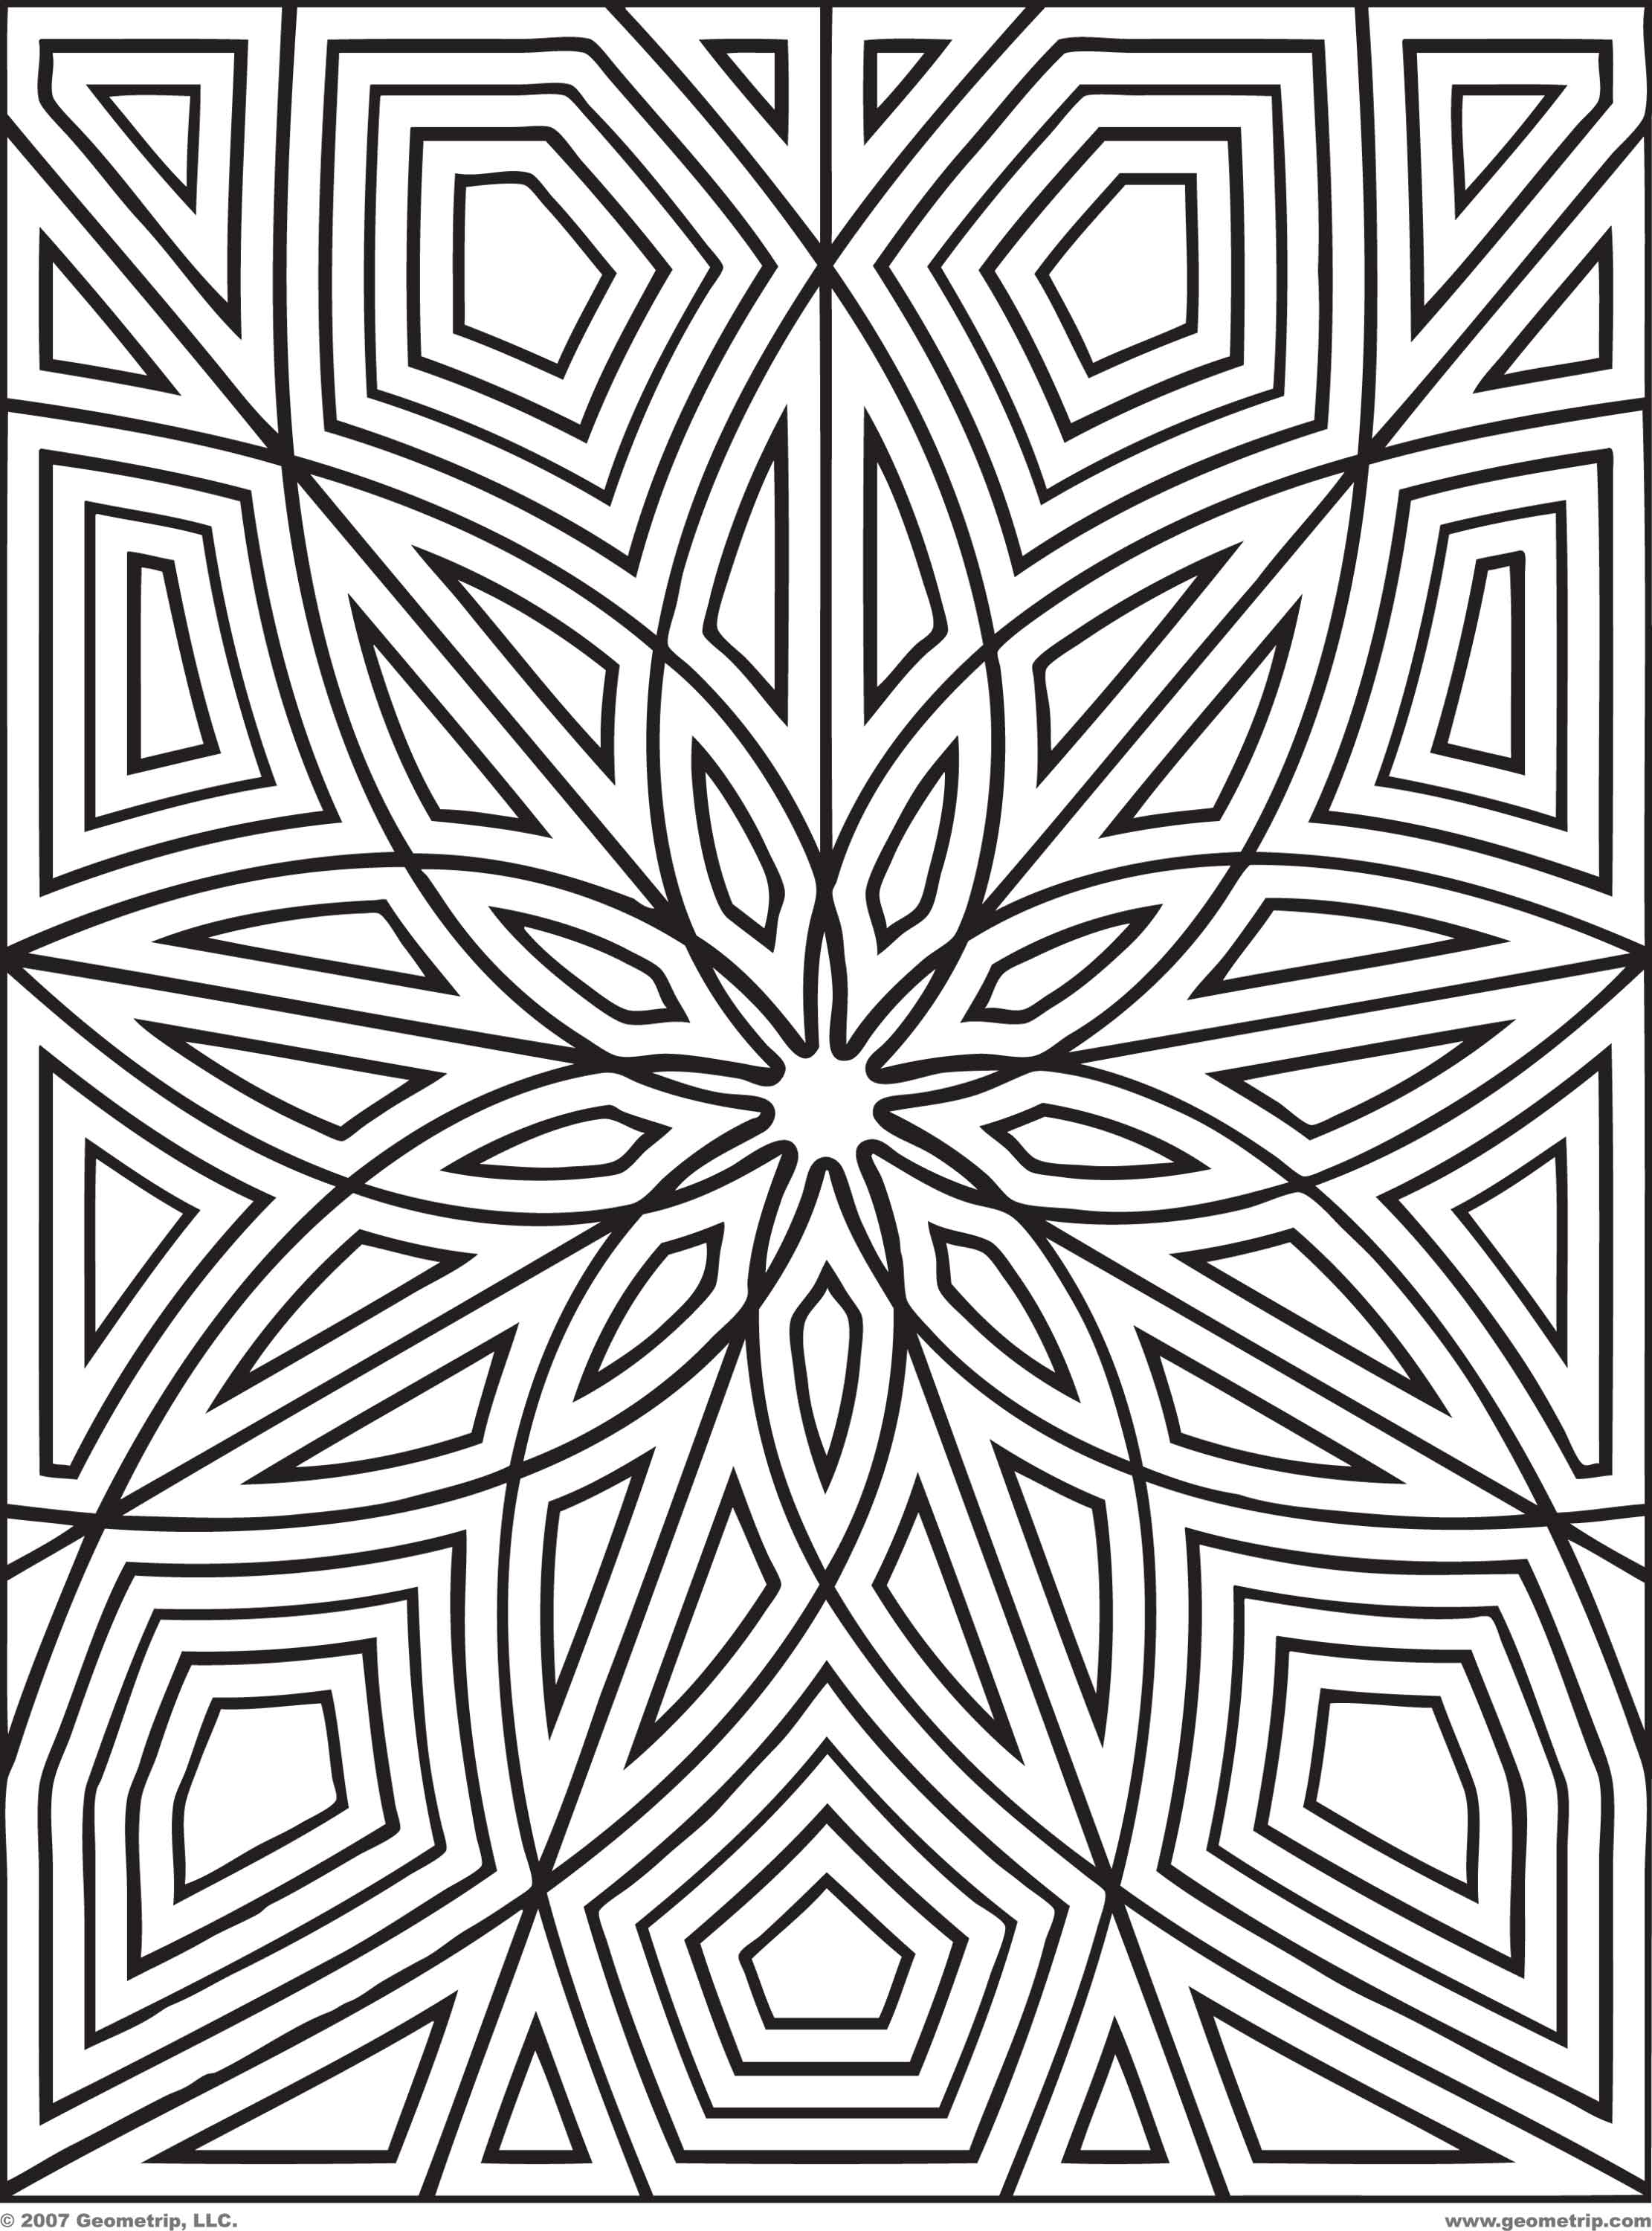 printable pattern coloring pages - High Quality Coloring Pages